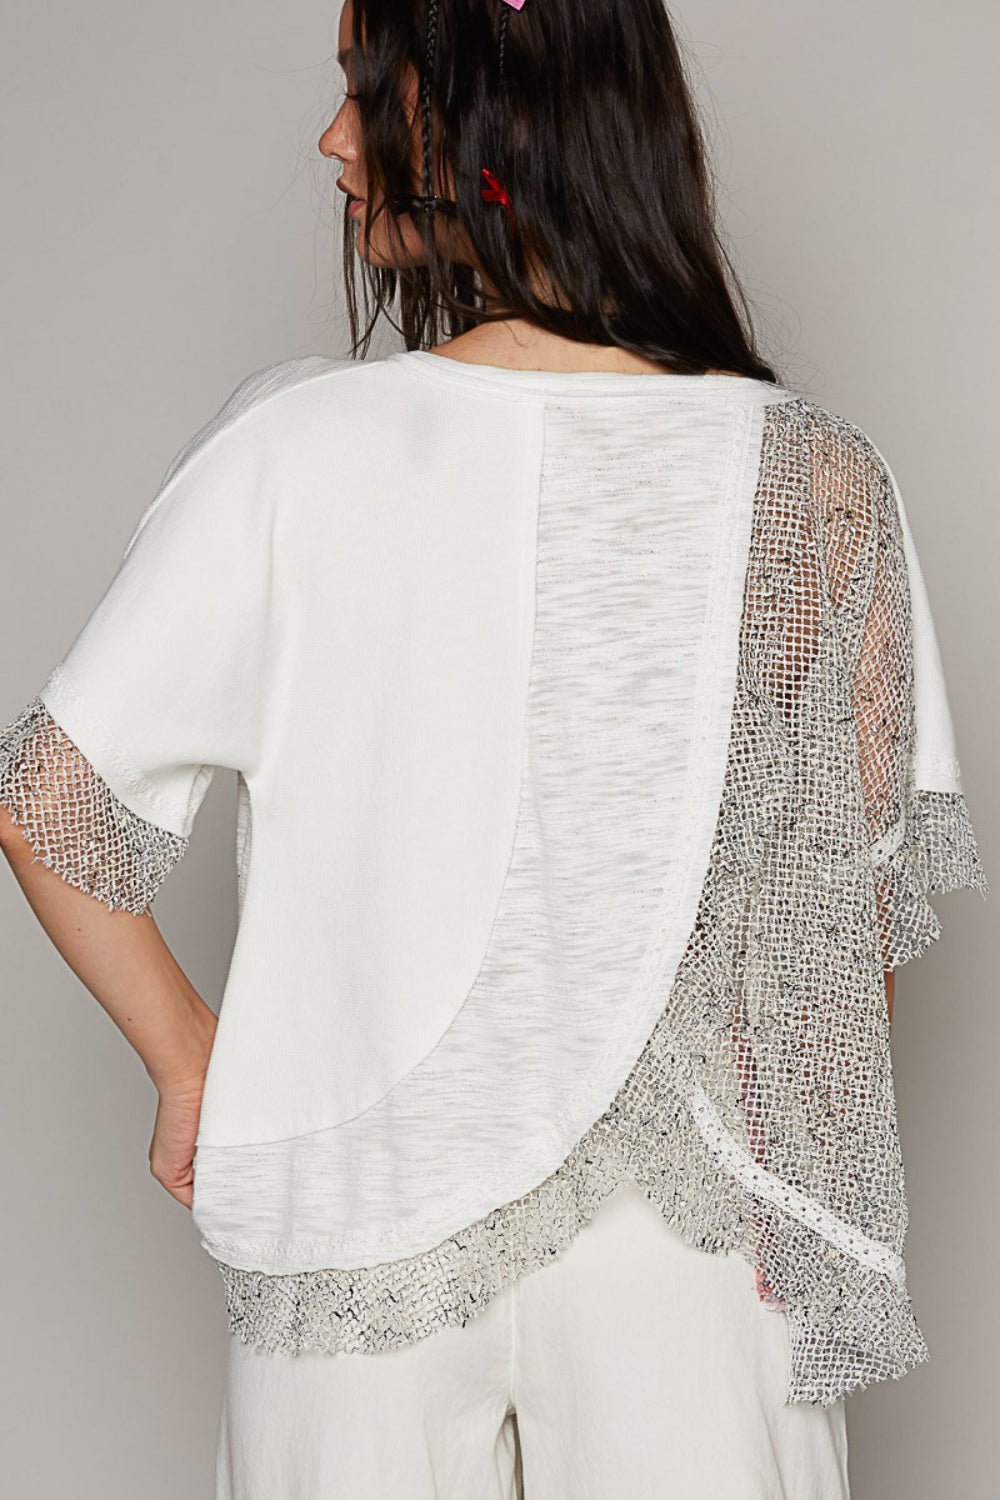 The Openwork V-Neck Half Sleeve Top is a chic piece that adds a touch of elegance to any outfit. The intricate openwork detailing on the sleeves creates a sophisticated and feminine look.  S - L